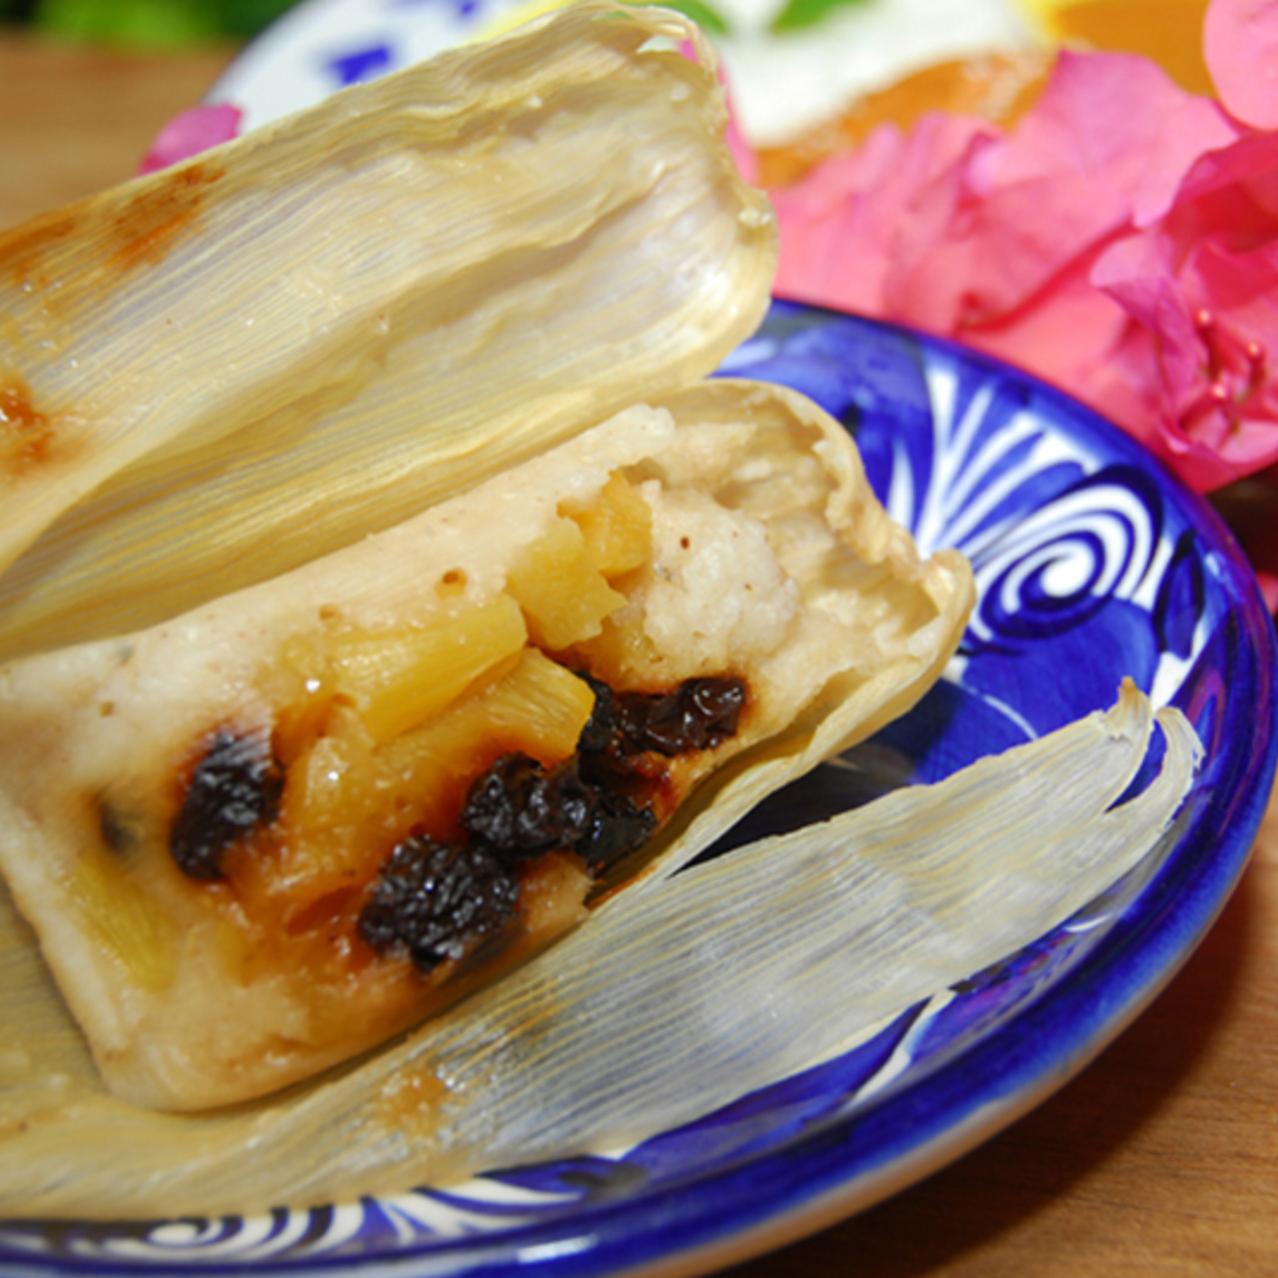  Get ready to indulge in a tropical twist on traditional tamales!